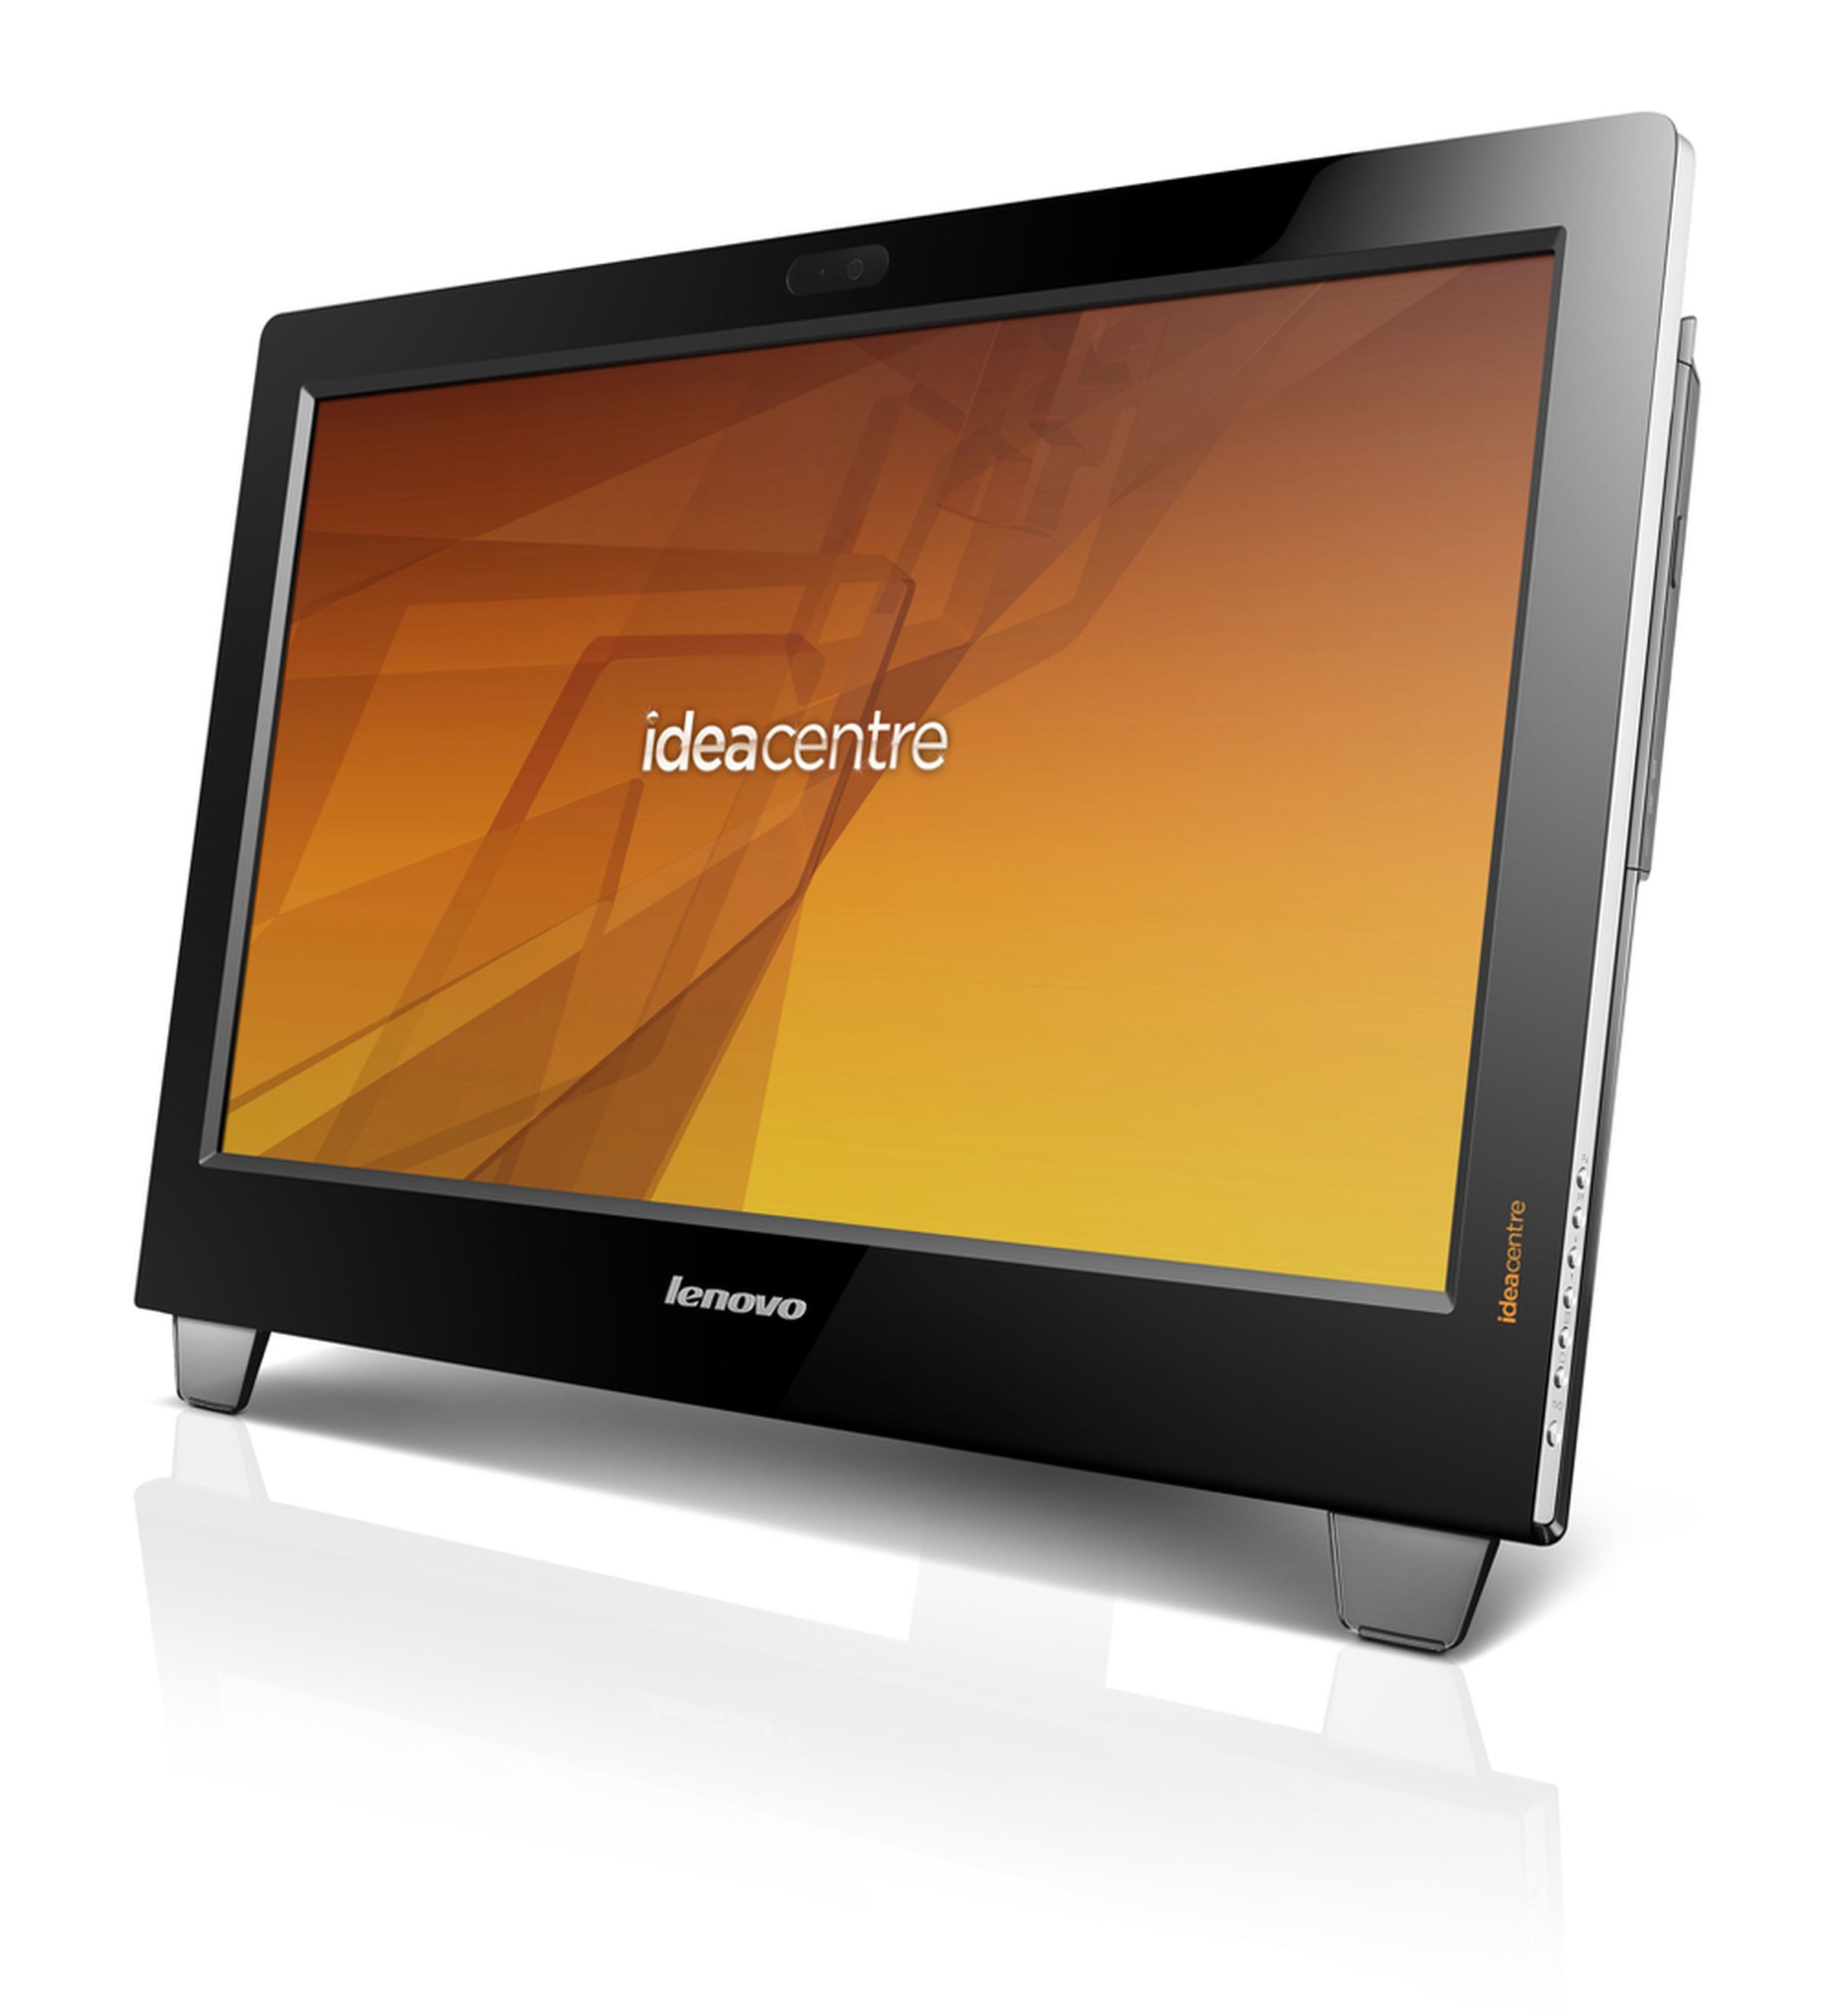 Lenovo B Series IdeaCentre all-in-one pictures